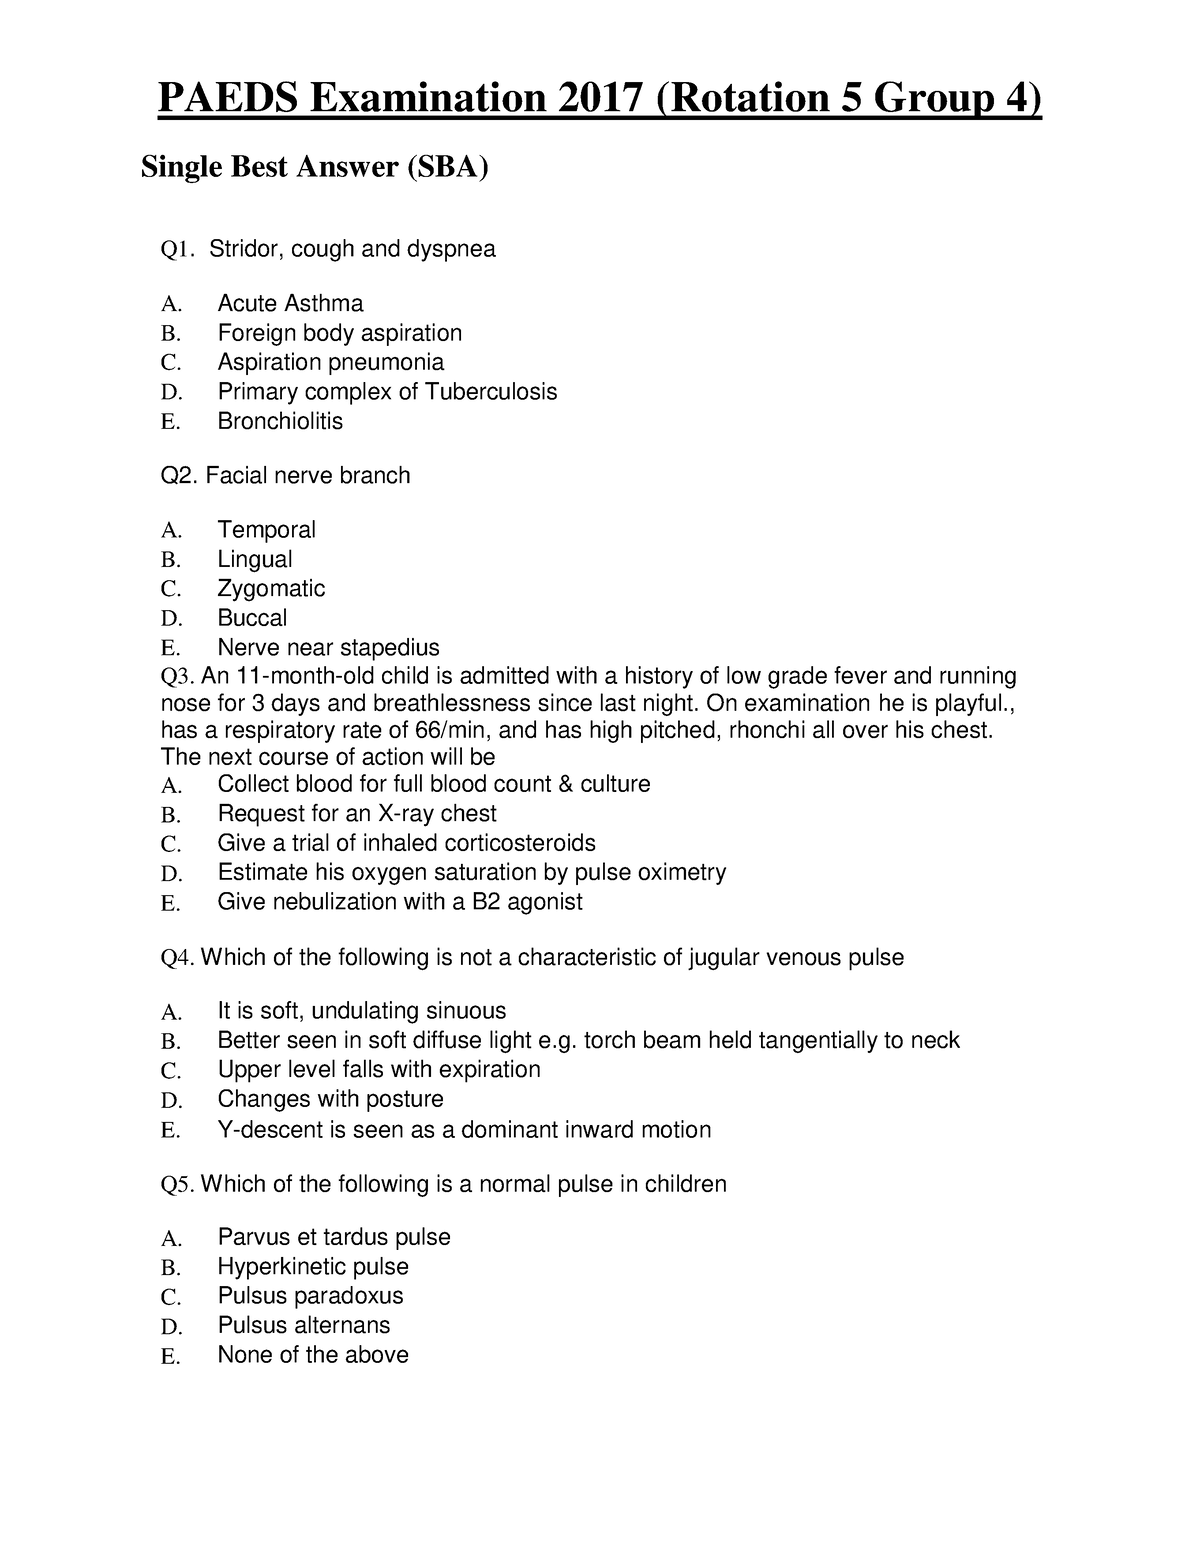 [ Paeds] End-Posting Examination Questions (G4) - PAEDS Examination ...